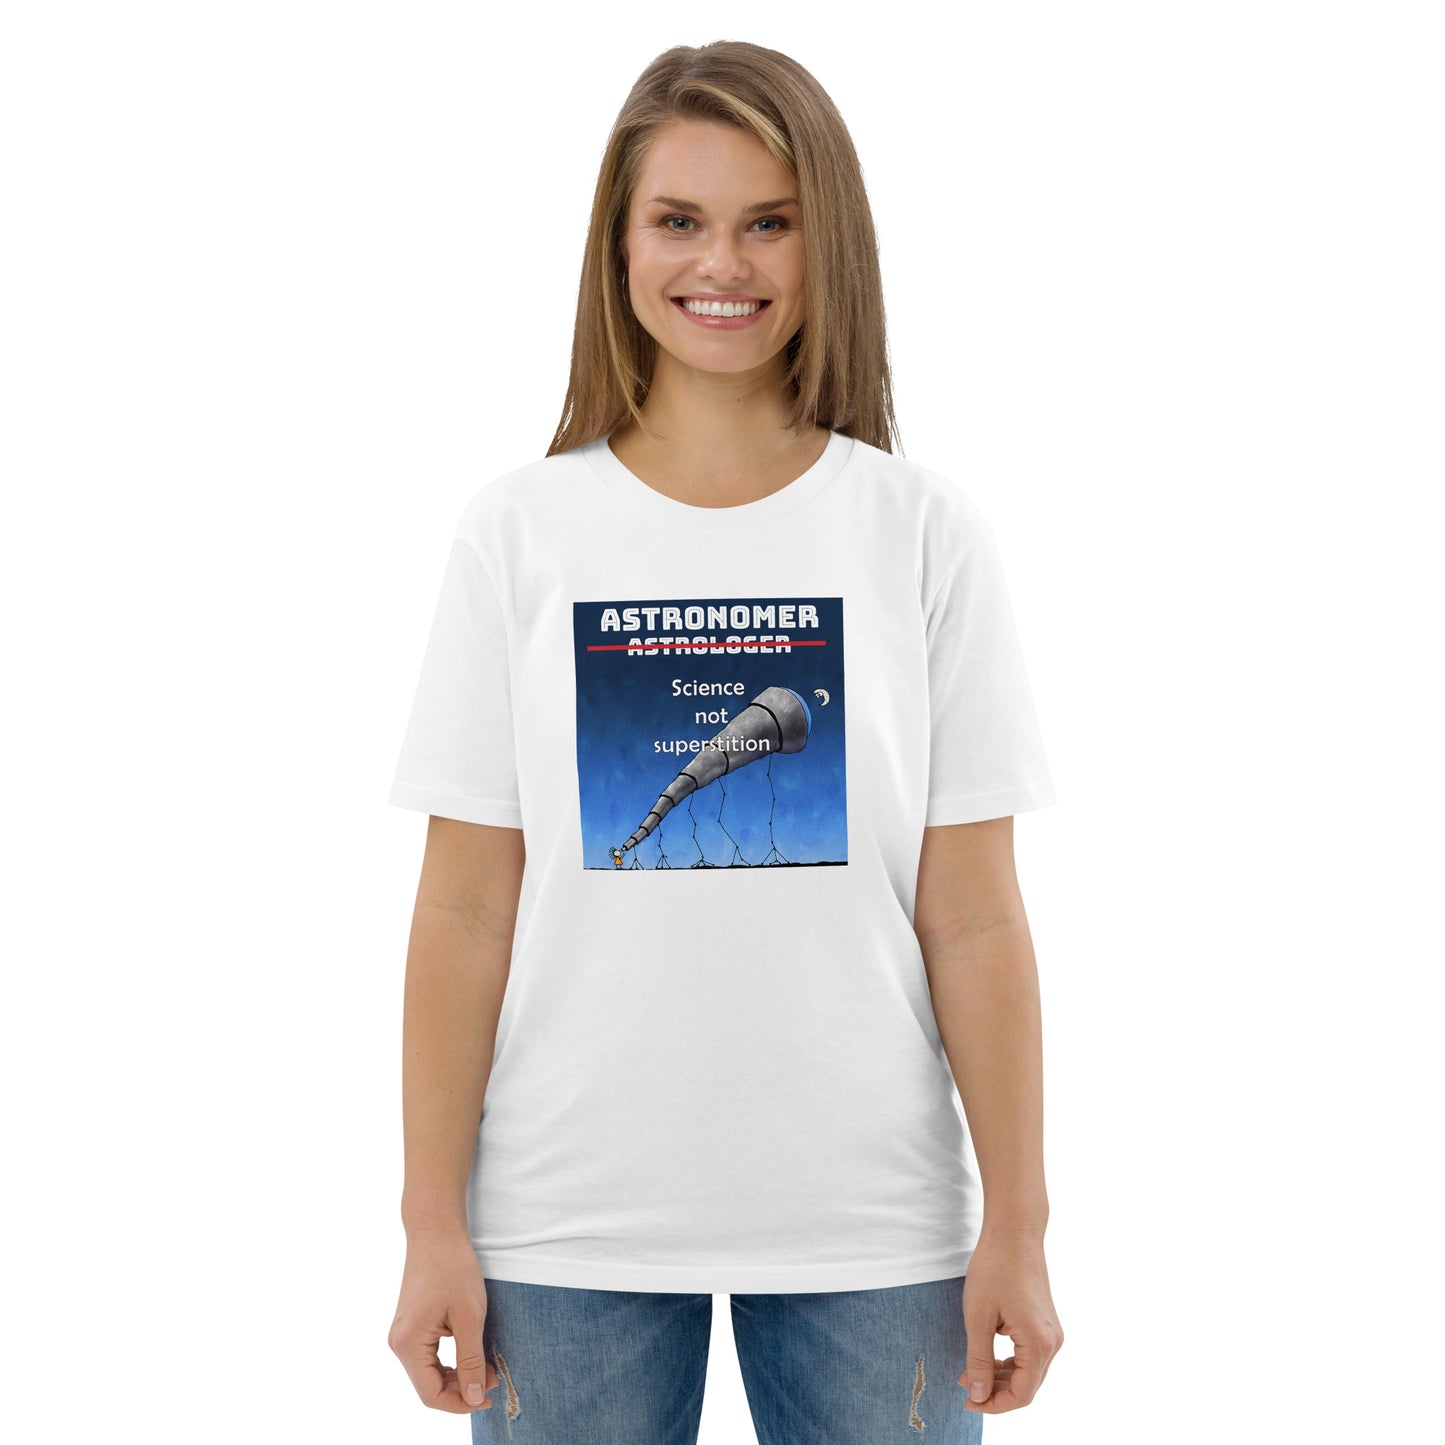 Unisex organic cotton t-shirt Astronomer Not Astrologer, Science not superstition